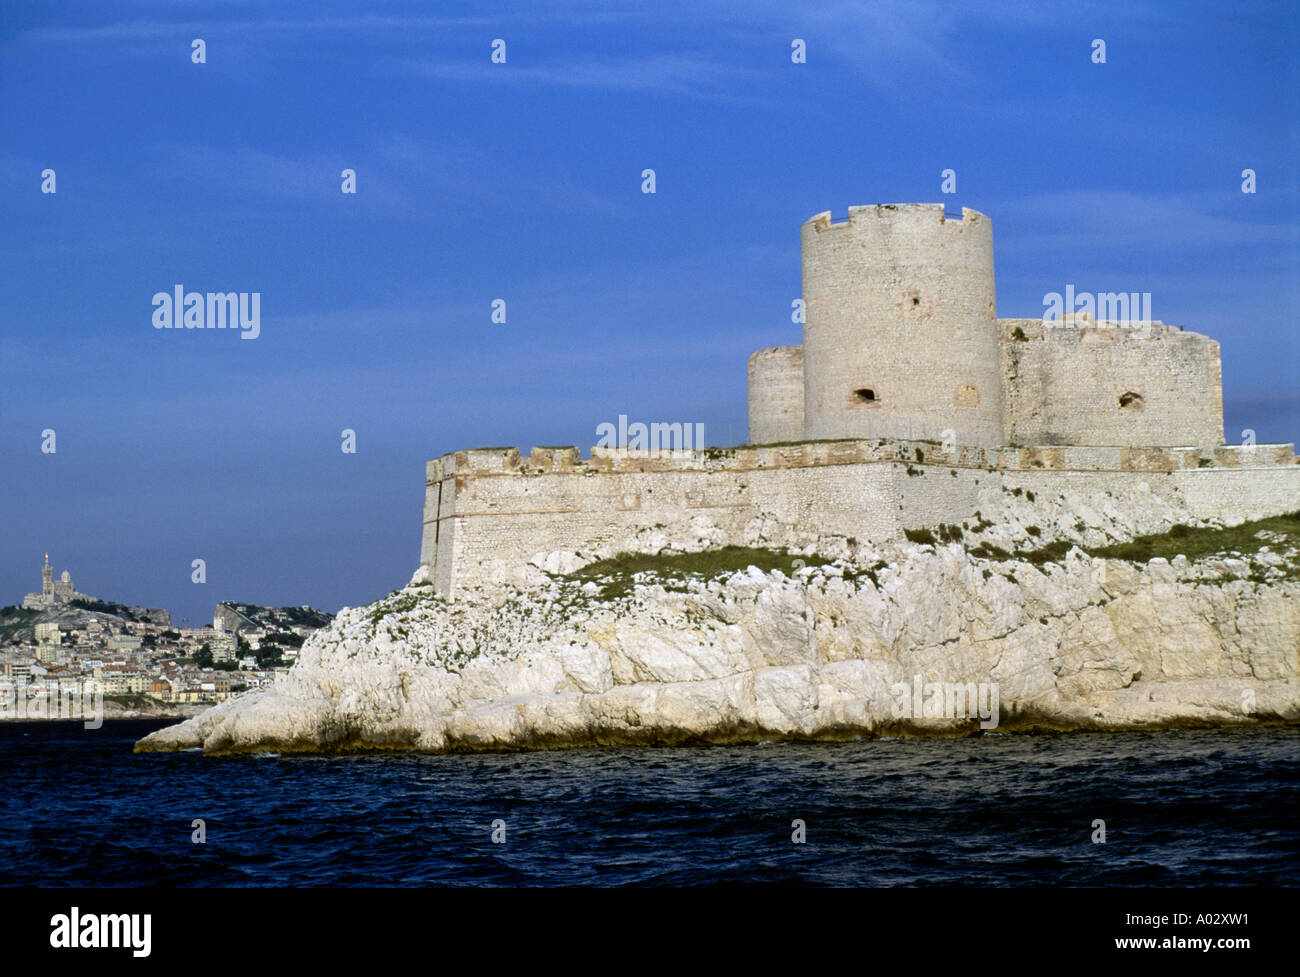 France The Chateau D If Castle Island And Marseille City In The Background Stock Photo